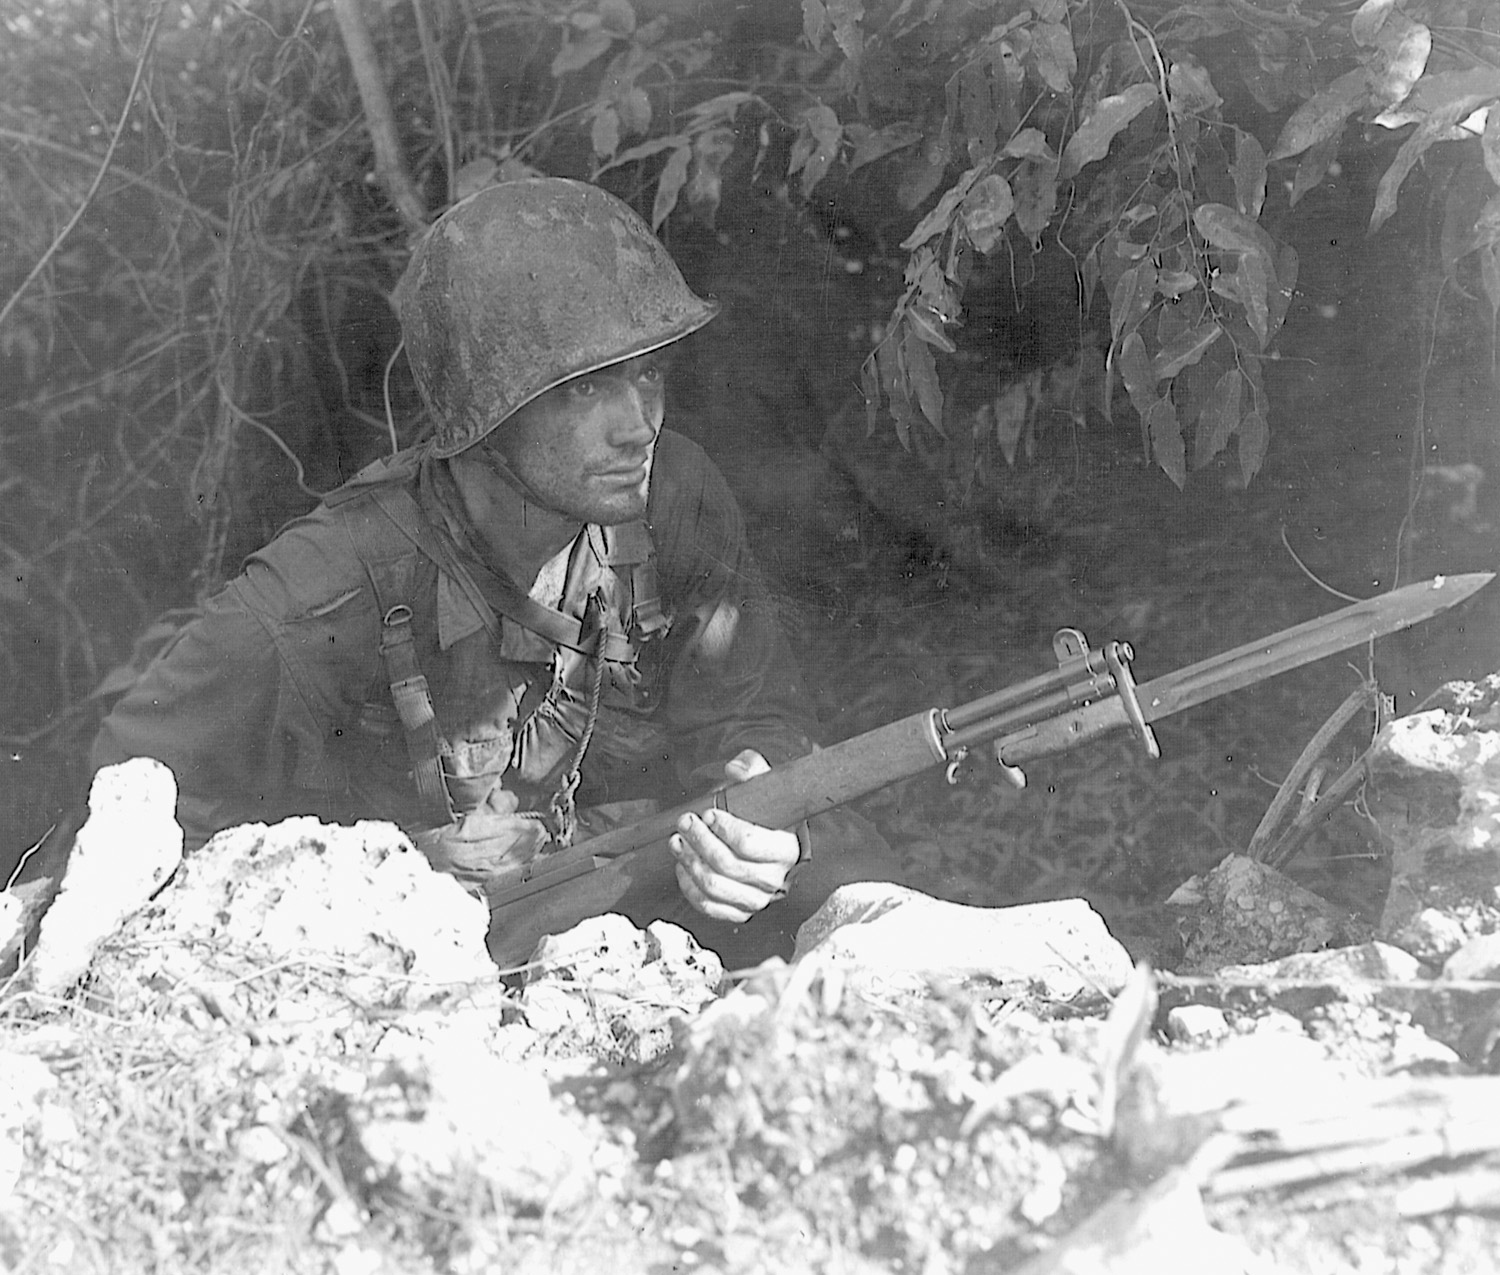 Staying alert, a soldier of the U.S. Army’s 27th Infantry Division watches for Japanese snipers.